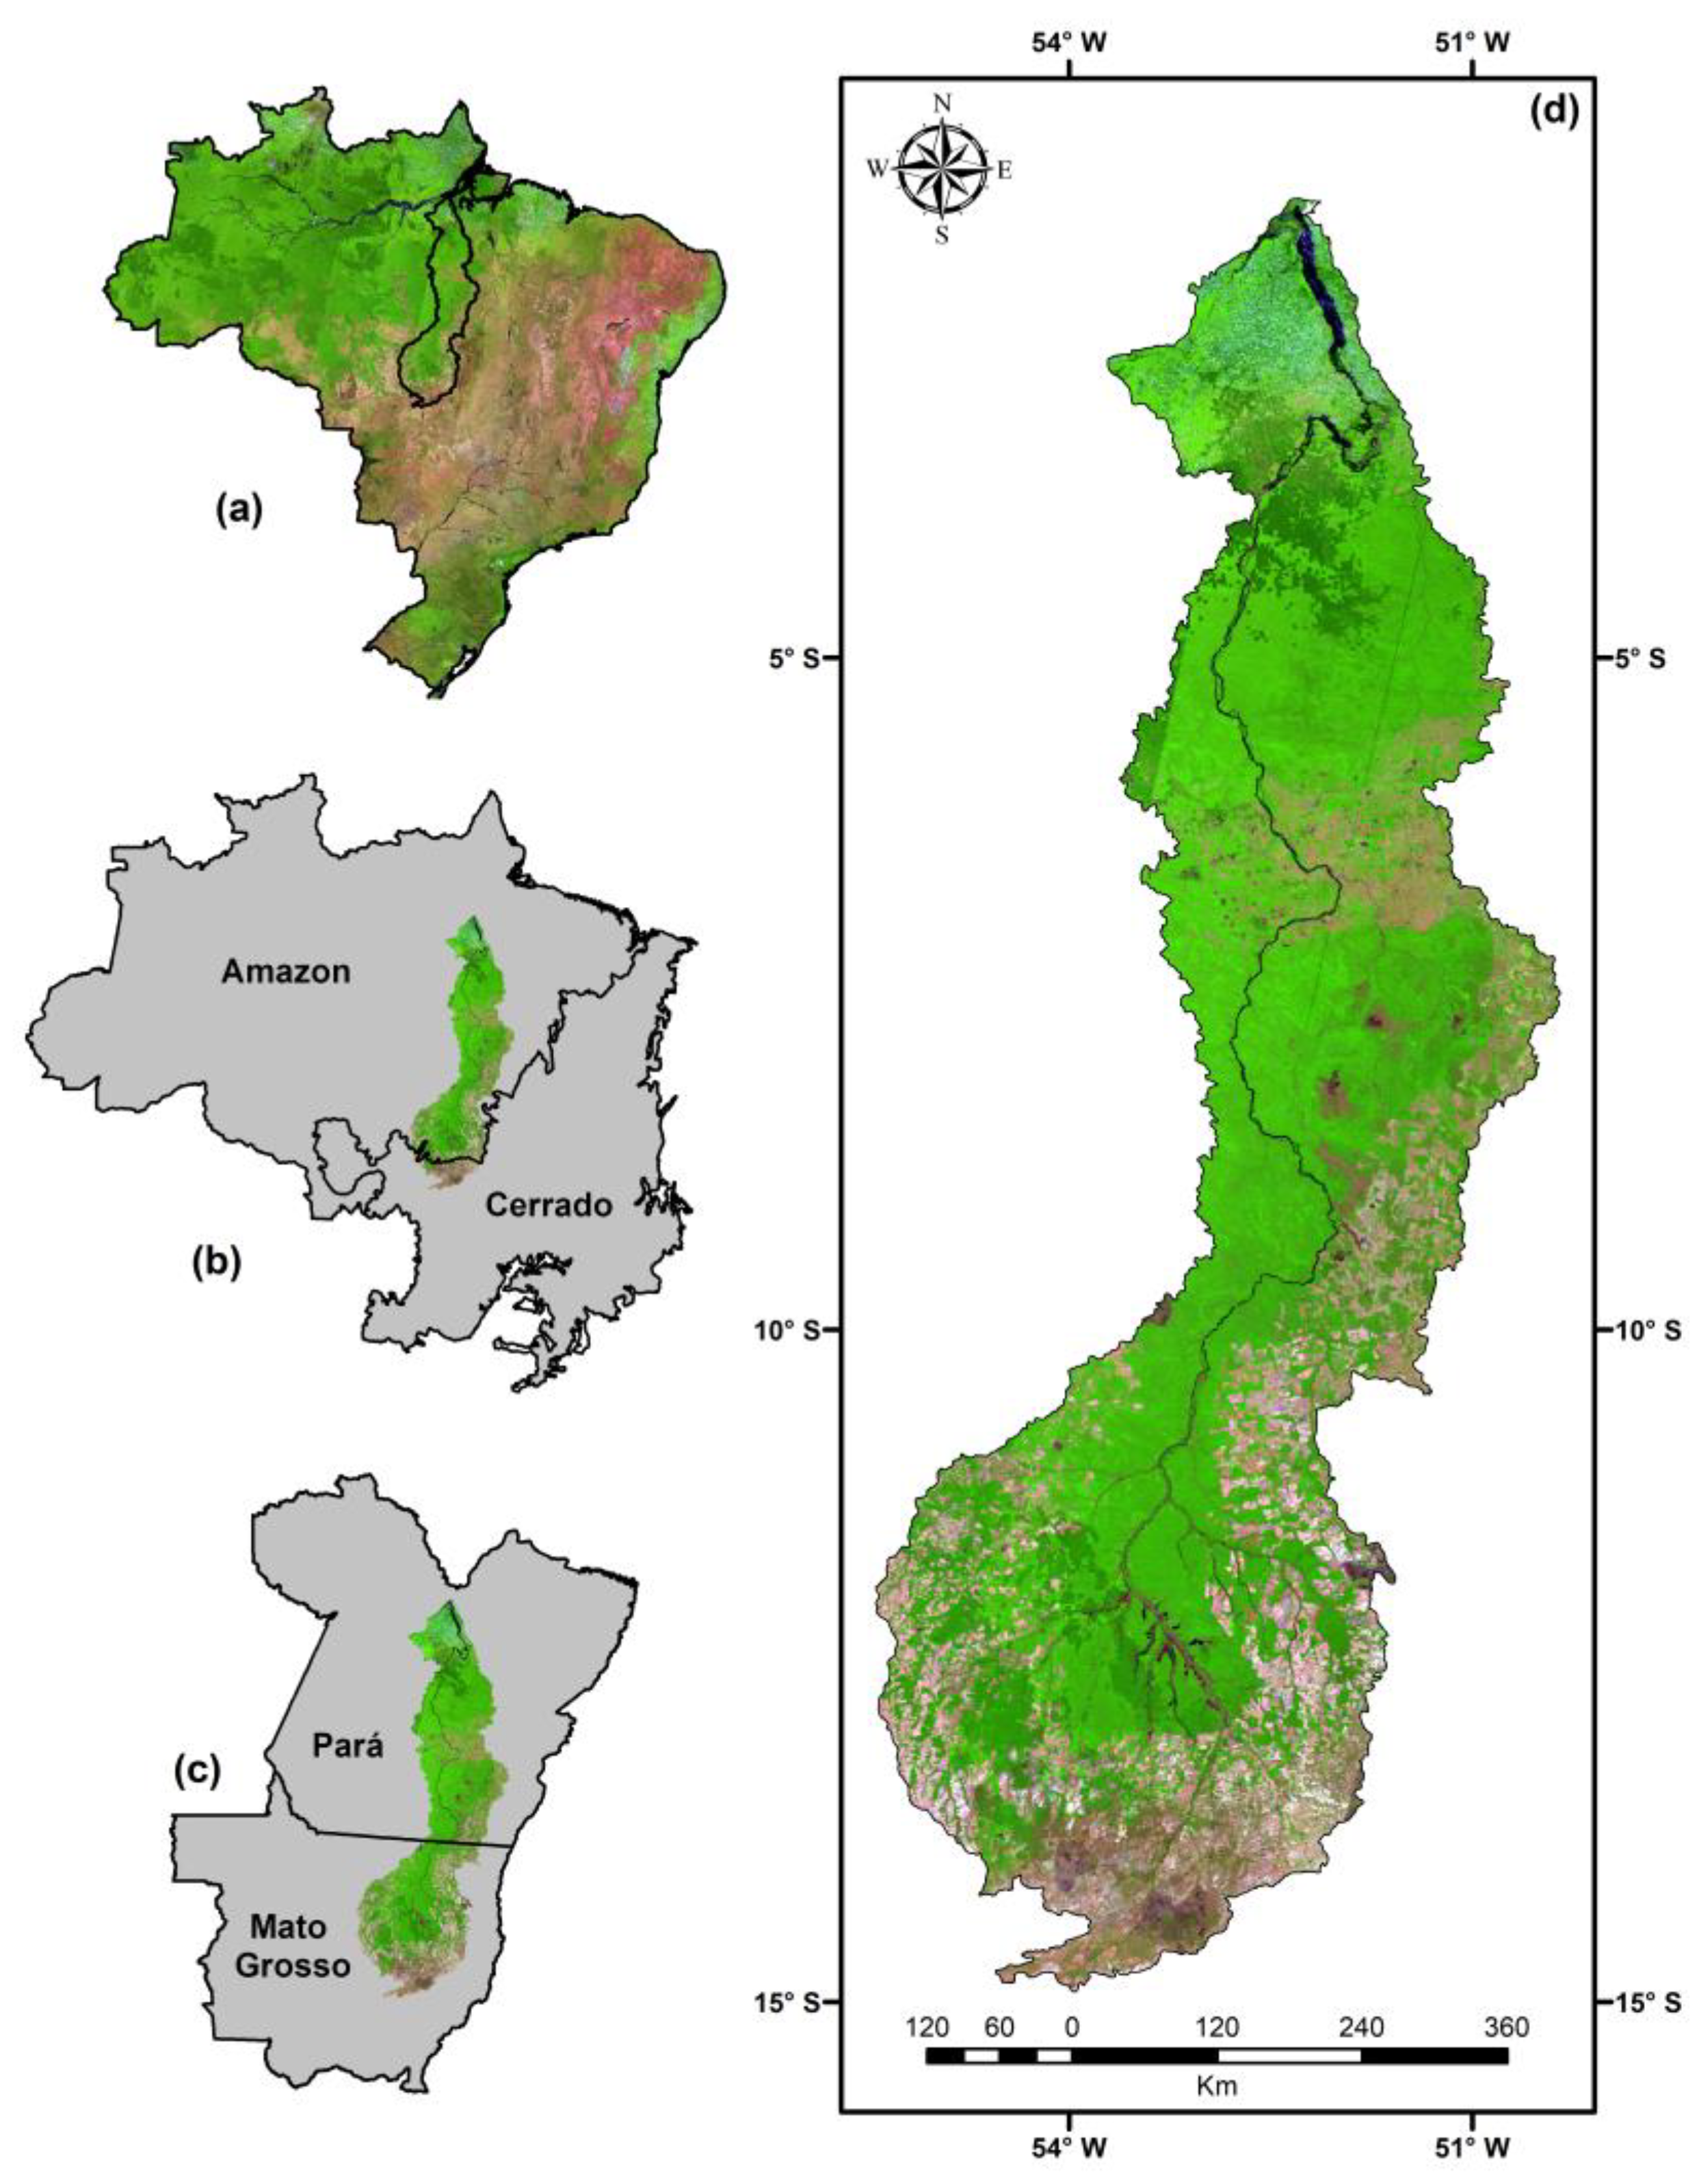 Agronomy | Free Full-Text | Evapotranspiration and Precipitation over  Pasture and Soybean Areas in the Xingu River Basin, an Expanding Amazonian  Agricultural Frontier